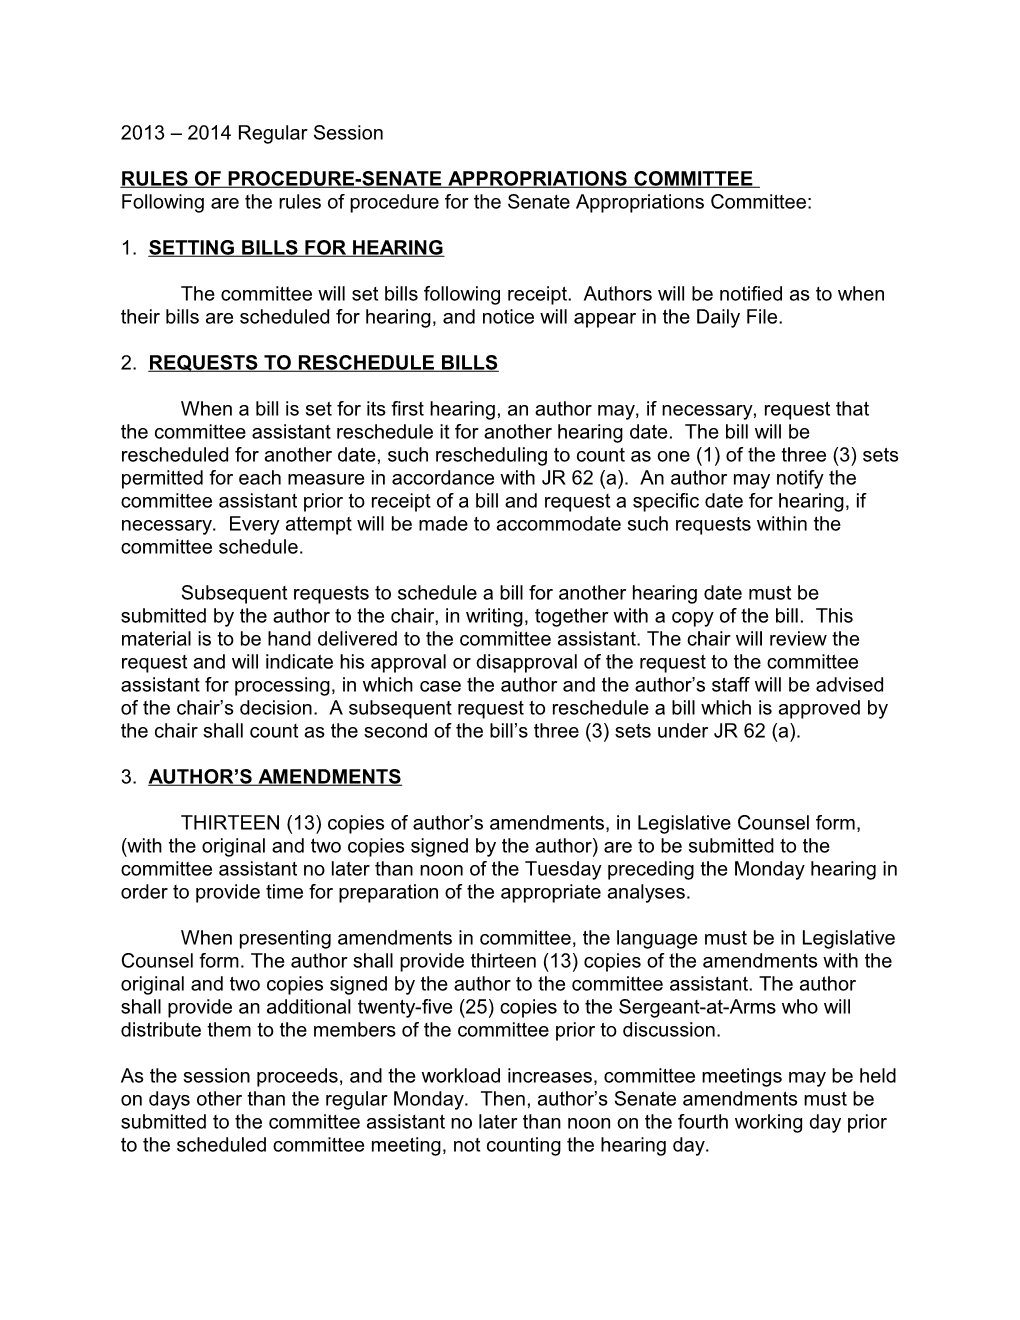 Rules of Procedure-Senate Appropriations Committee